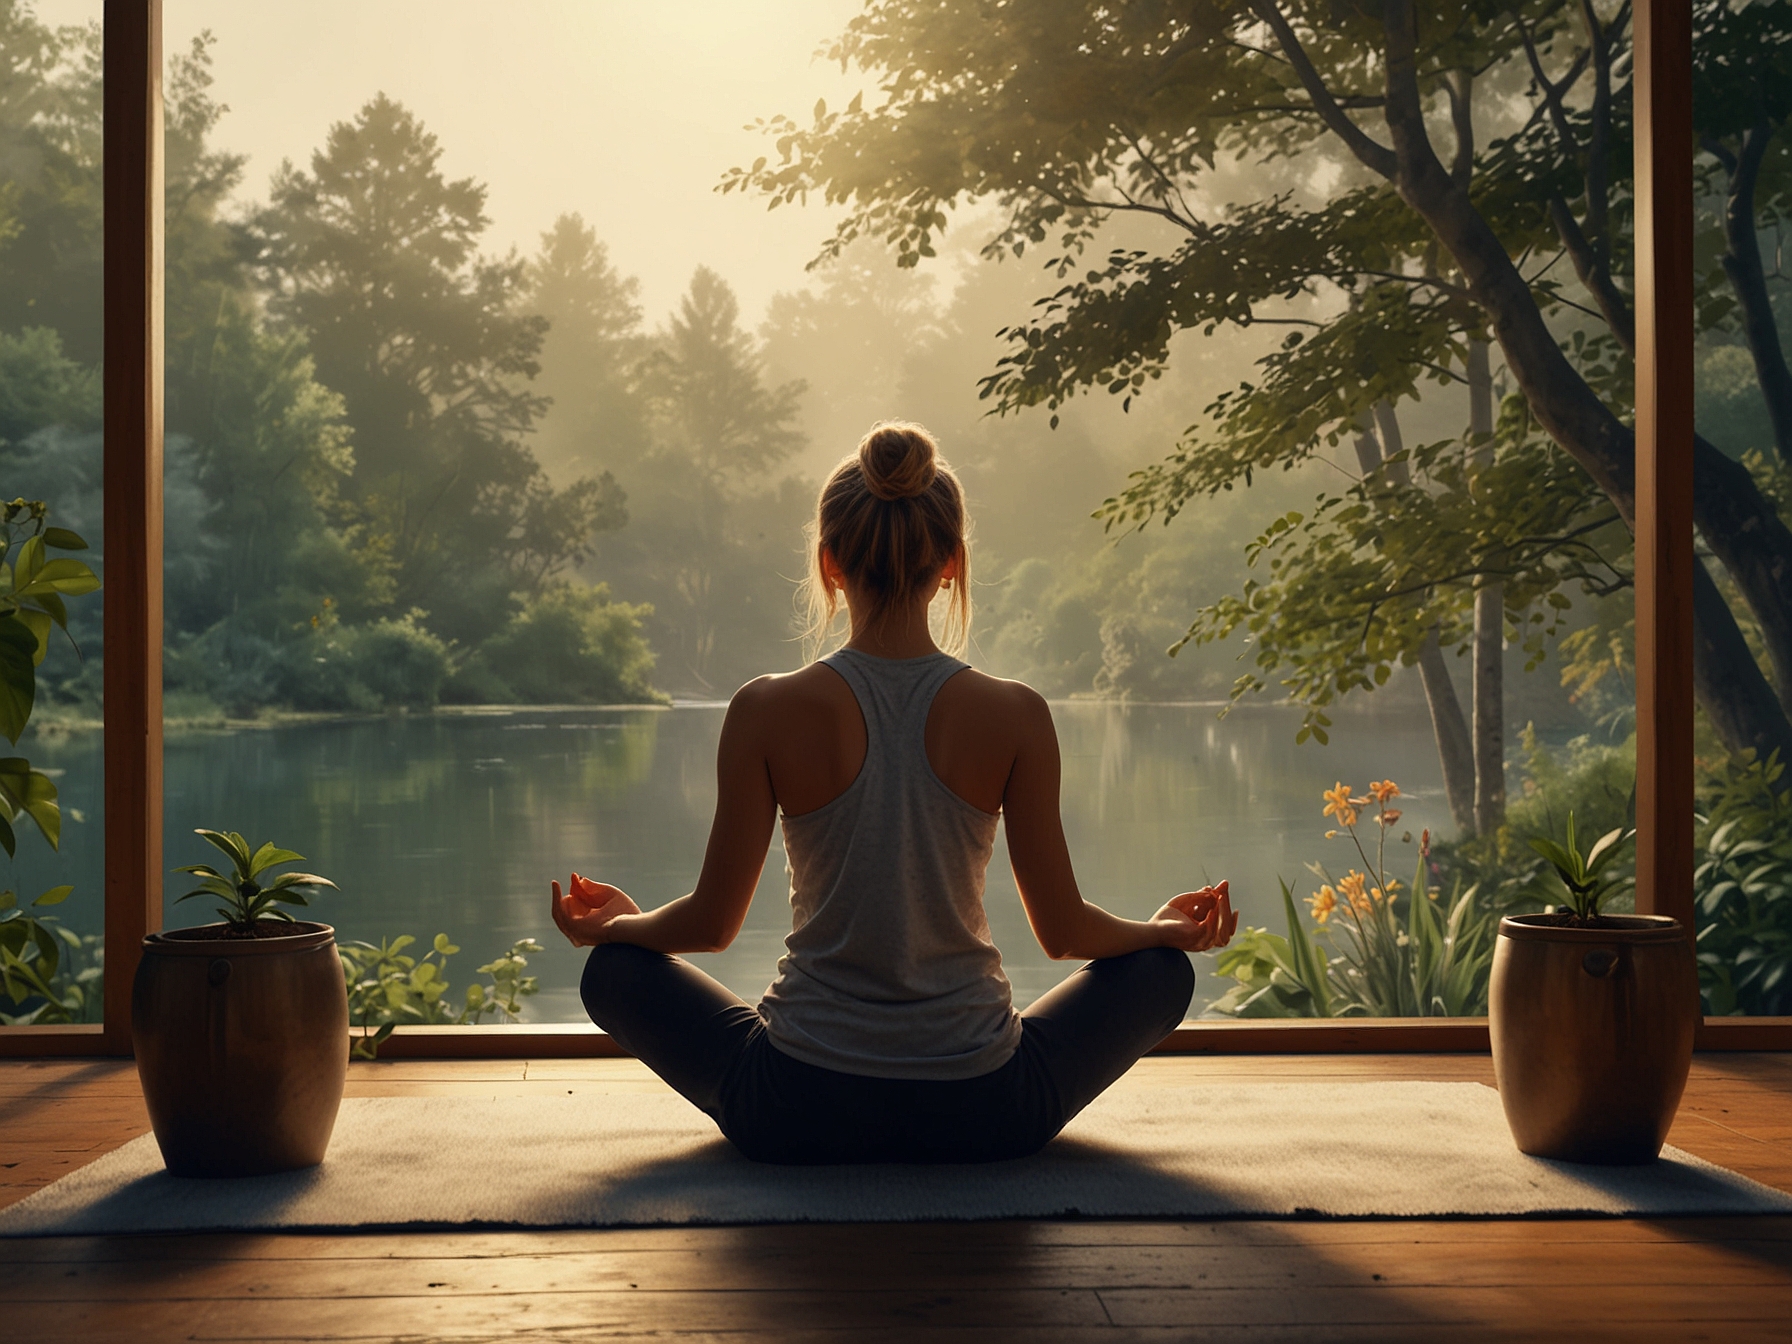 A serene scene with a person enjoying a cup of herbal tea and engaging in light exercise, like yoga or stretching.